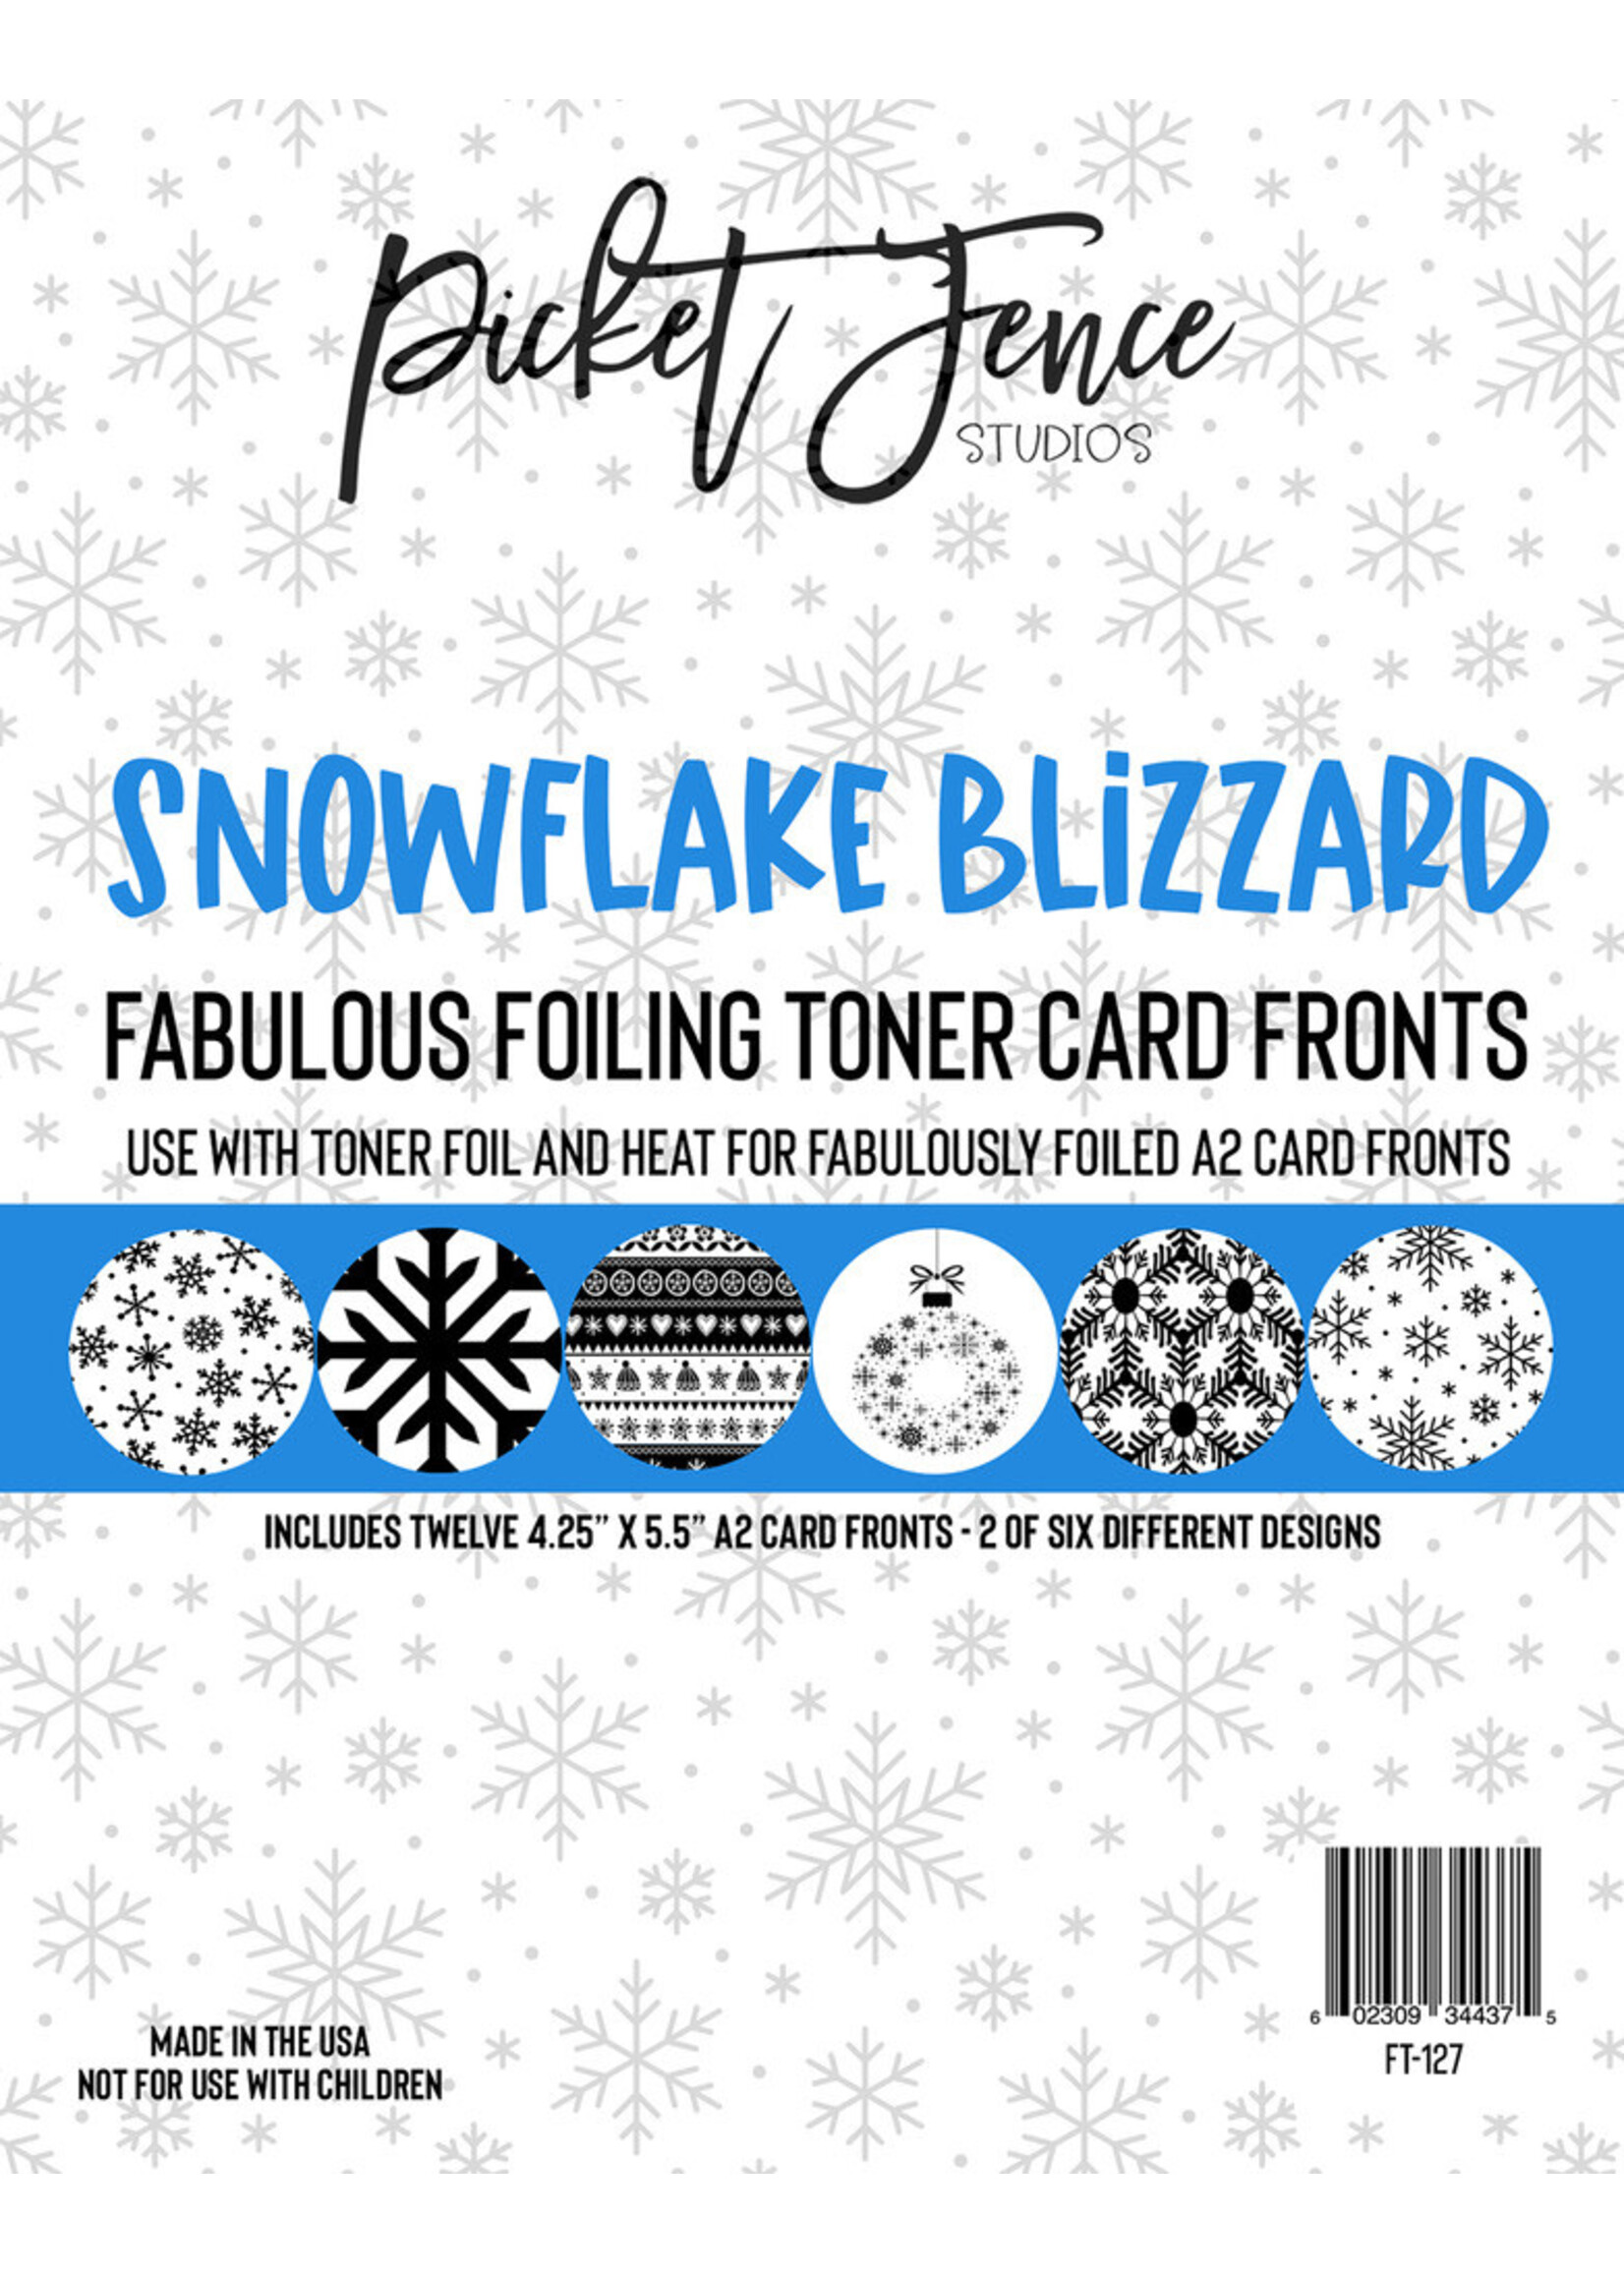 Picket Fence Studios Foiling Toner Card Fronts, Snowflake Blizzards